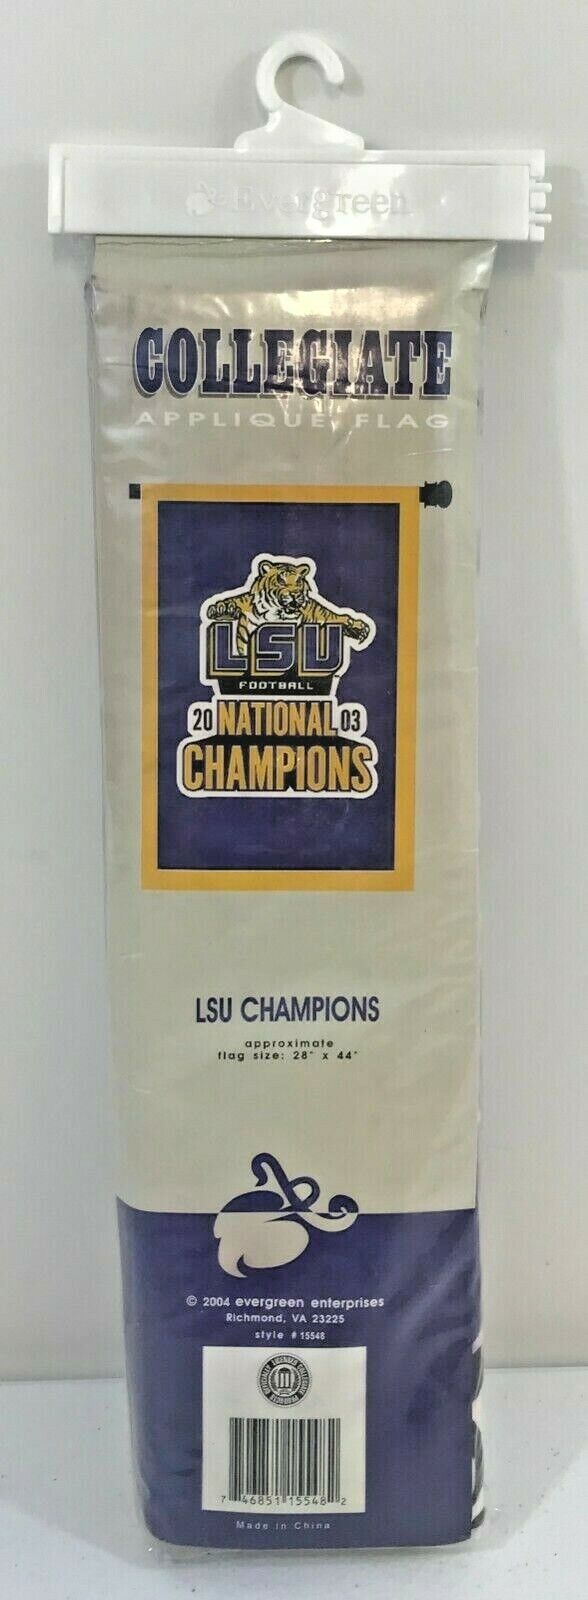 Louisiana LSU CHAMPIONS 2003 Tigers NCAA Double Sided Applique House Flag NEW - $14.99